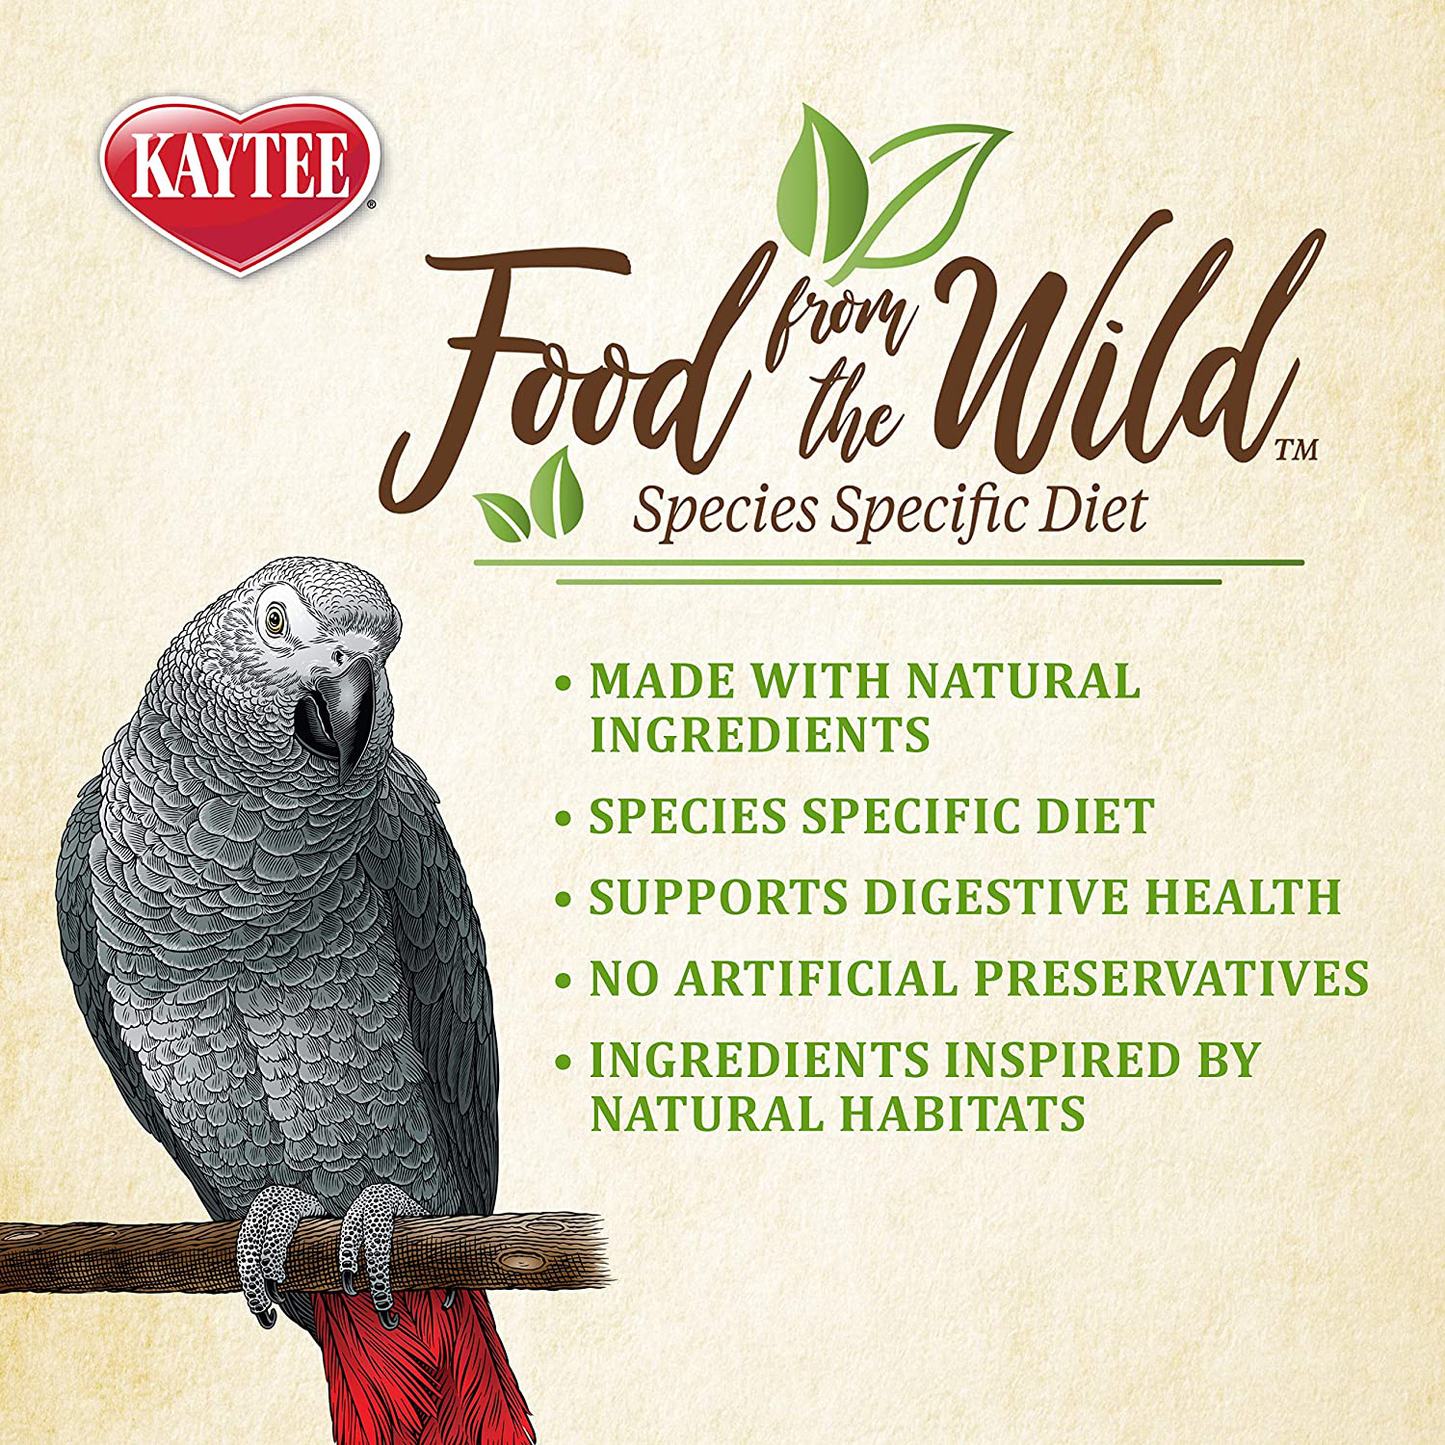 Kaytee Food from the Wild, Parrot Food, 2.5 Pounds